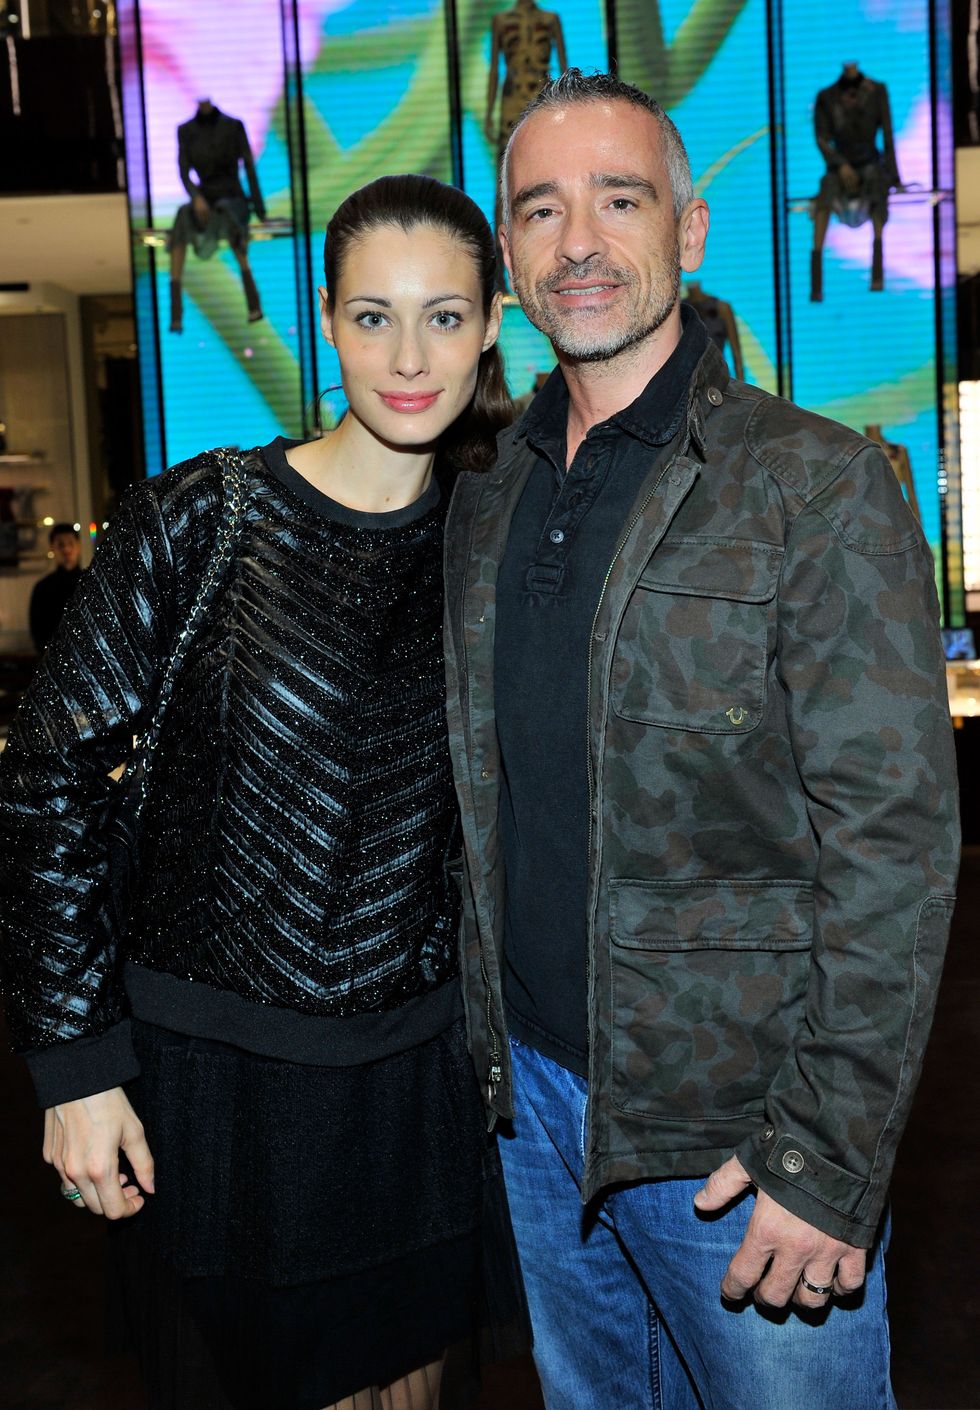 BEVERLY HILLS, CA - OCTOBER 30:  Actress Marica Pellegrinelli (L) and musician Eros Ramazzotti attend a cocktail party hosted by Gucci's Frida Giannini and Patrizio Di Marco to celebrate the new Beverly Hills store on October 30, 2014 in Beverly Hills, California.  (Photo by Donato Sardella/Getty Images for Gucci)